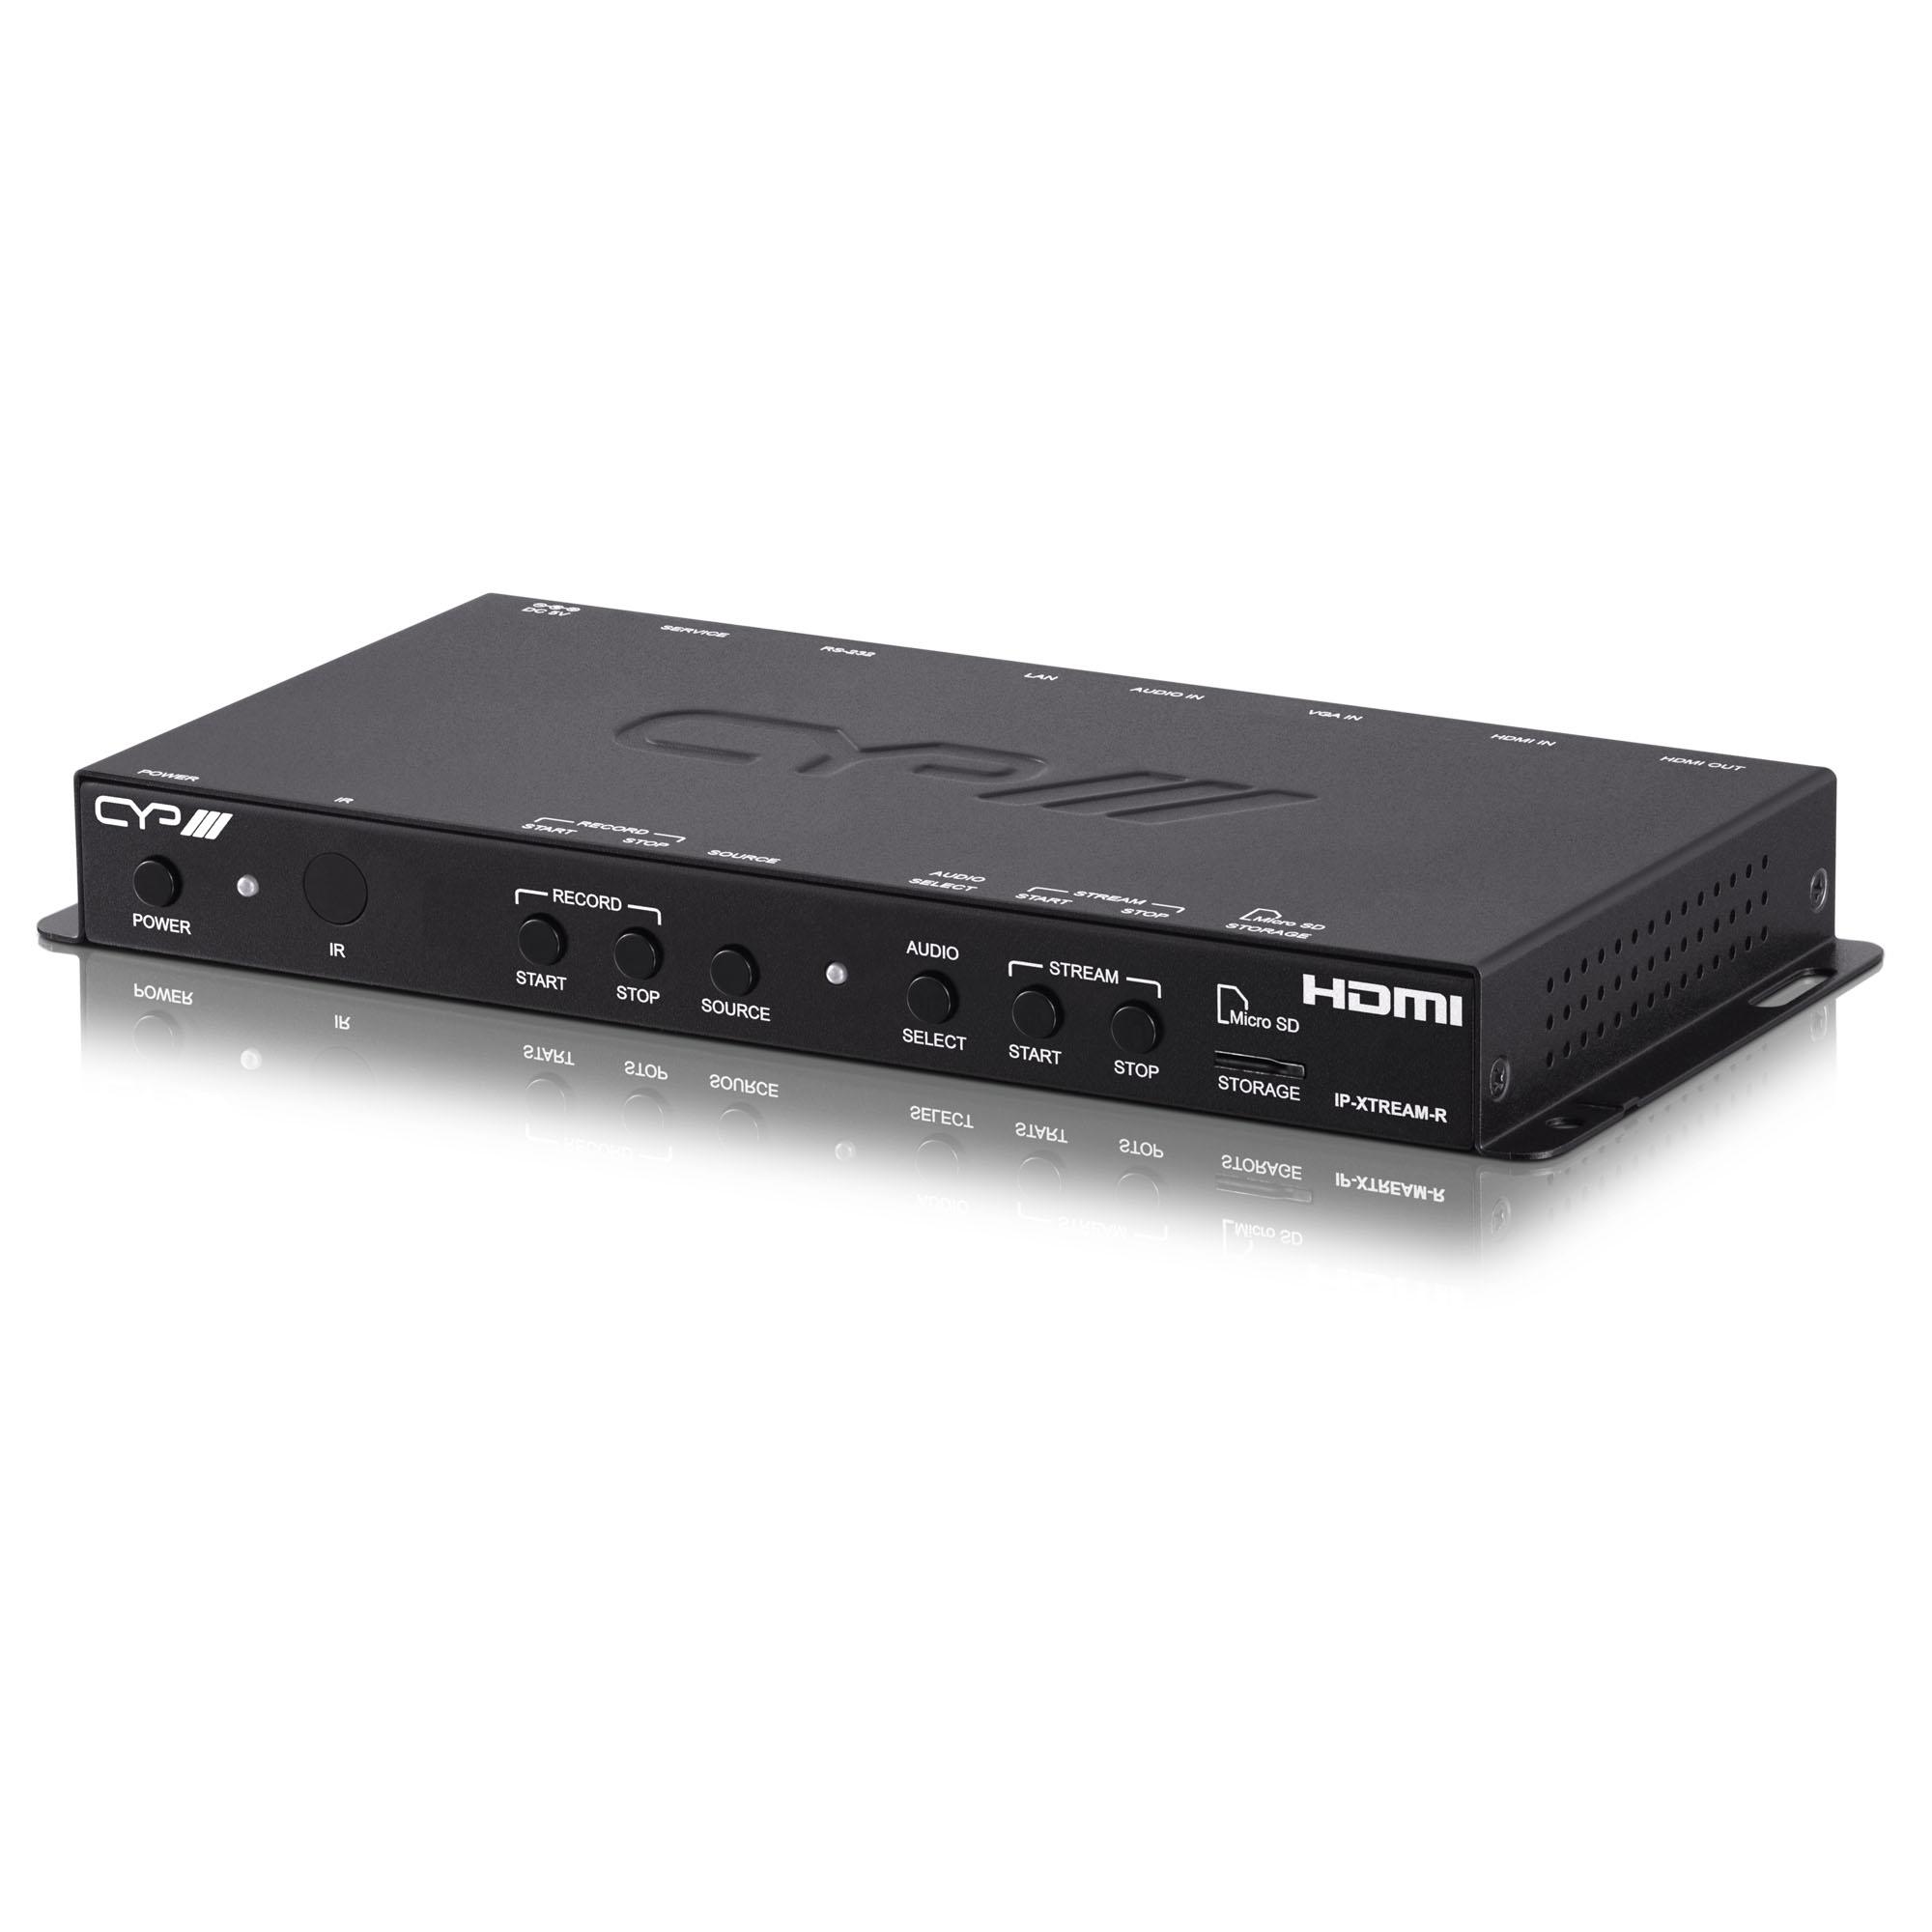 IP-XTREAM-R HDMI/VGA to HDMI Live Video Streamer with Recording Function